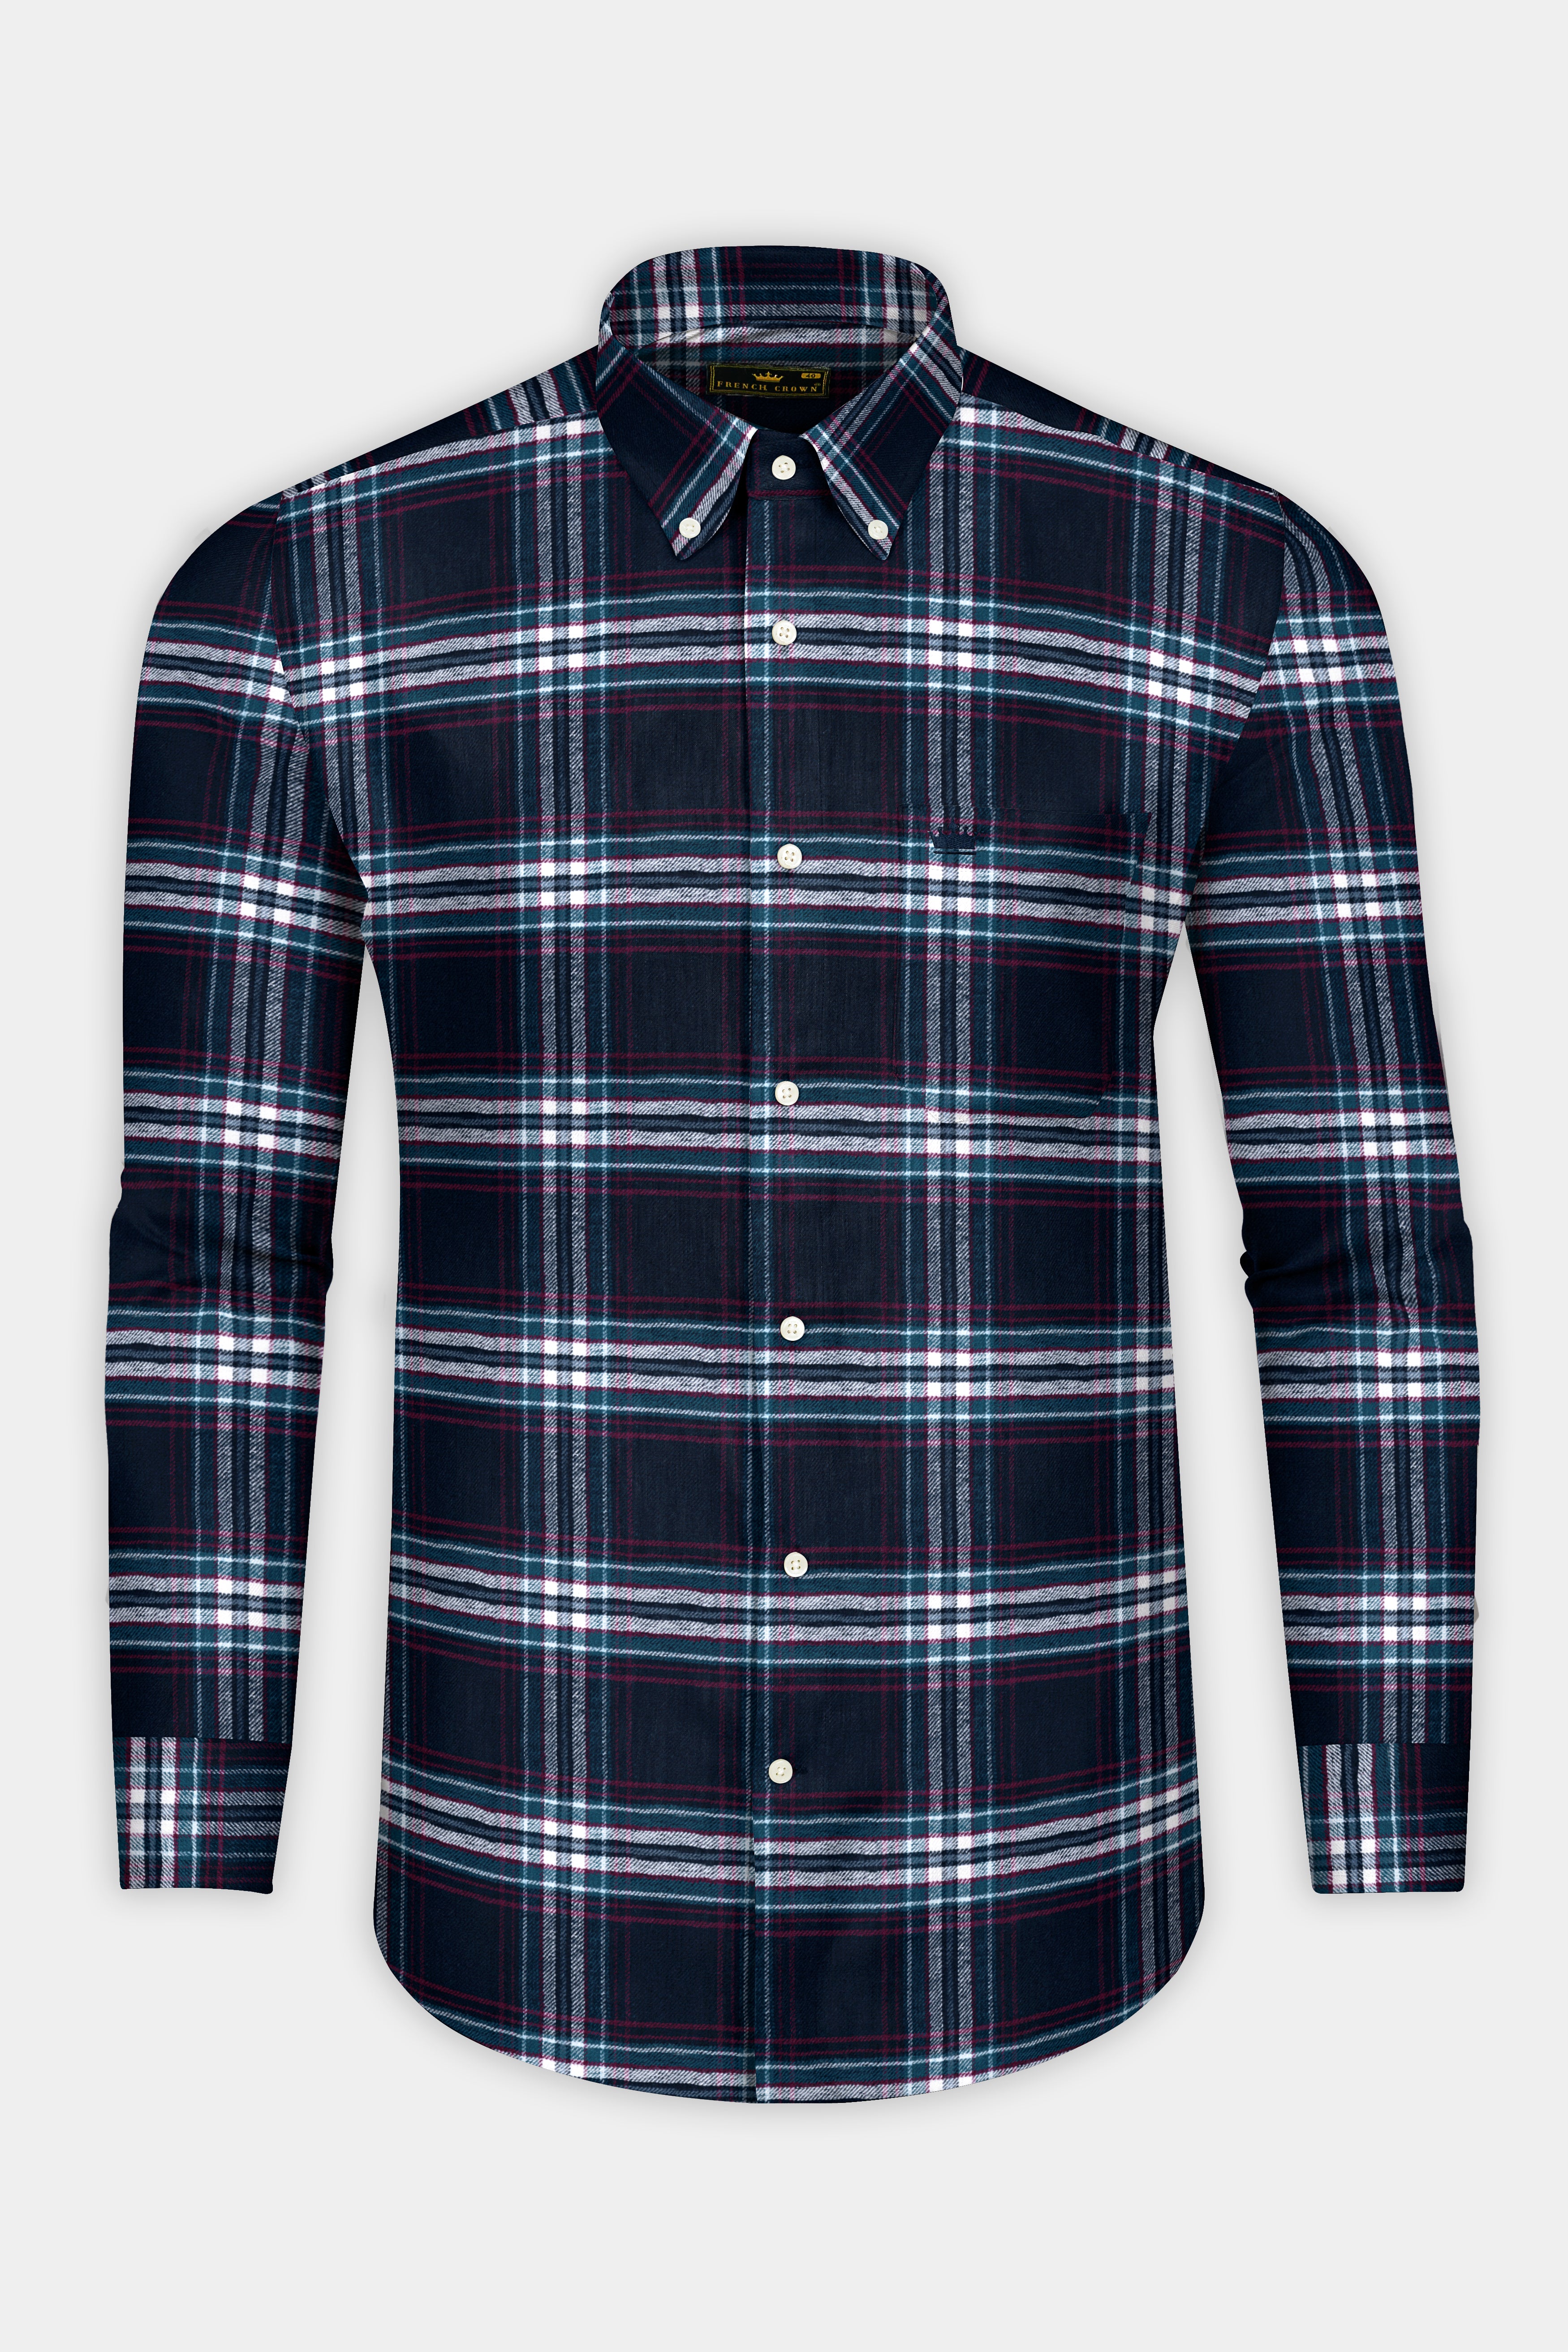 Dark Charcoal Blue with Astronaut Blue and White Plaid Flannel Shirt